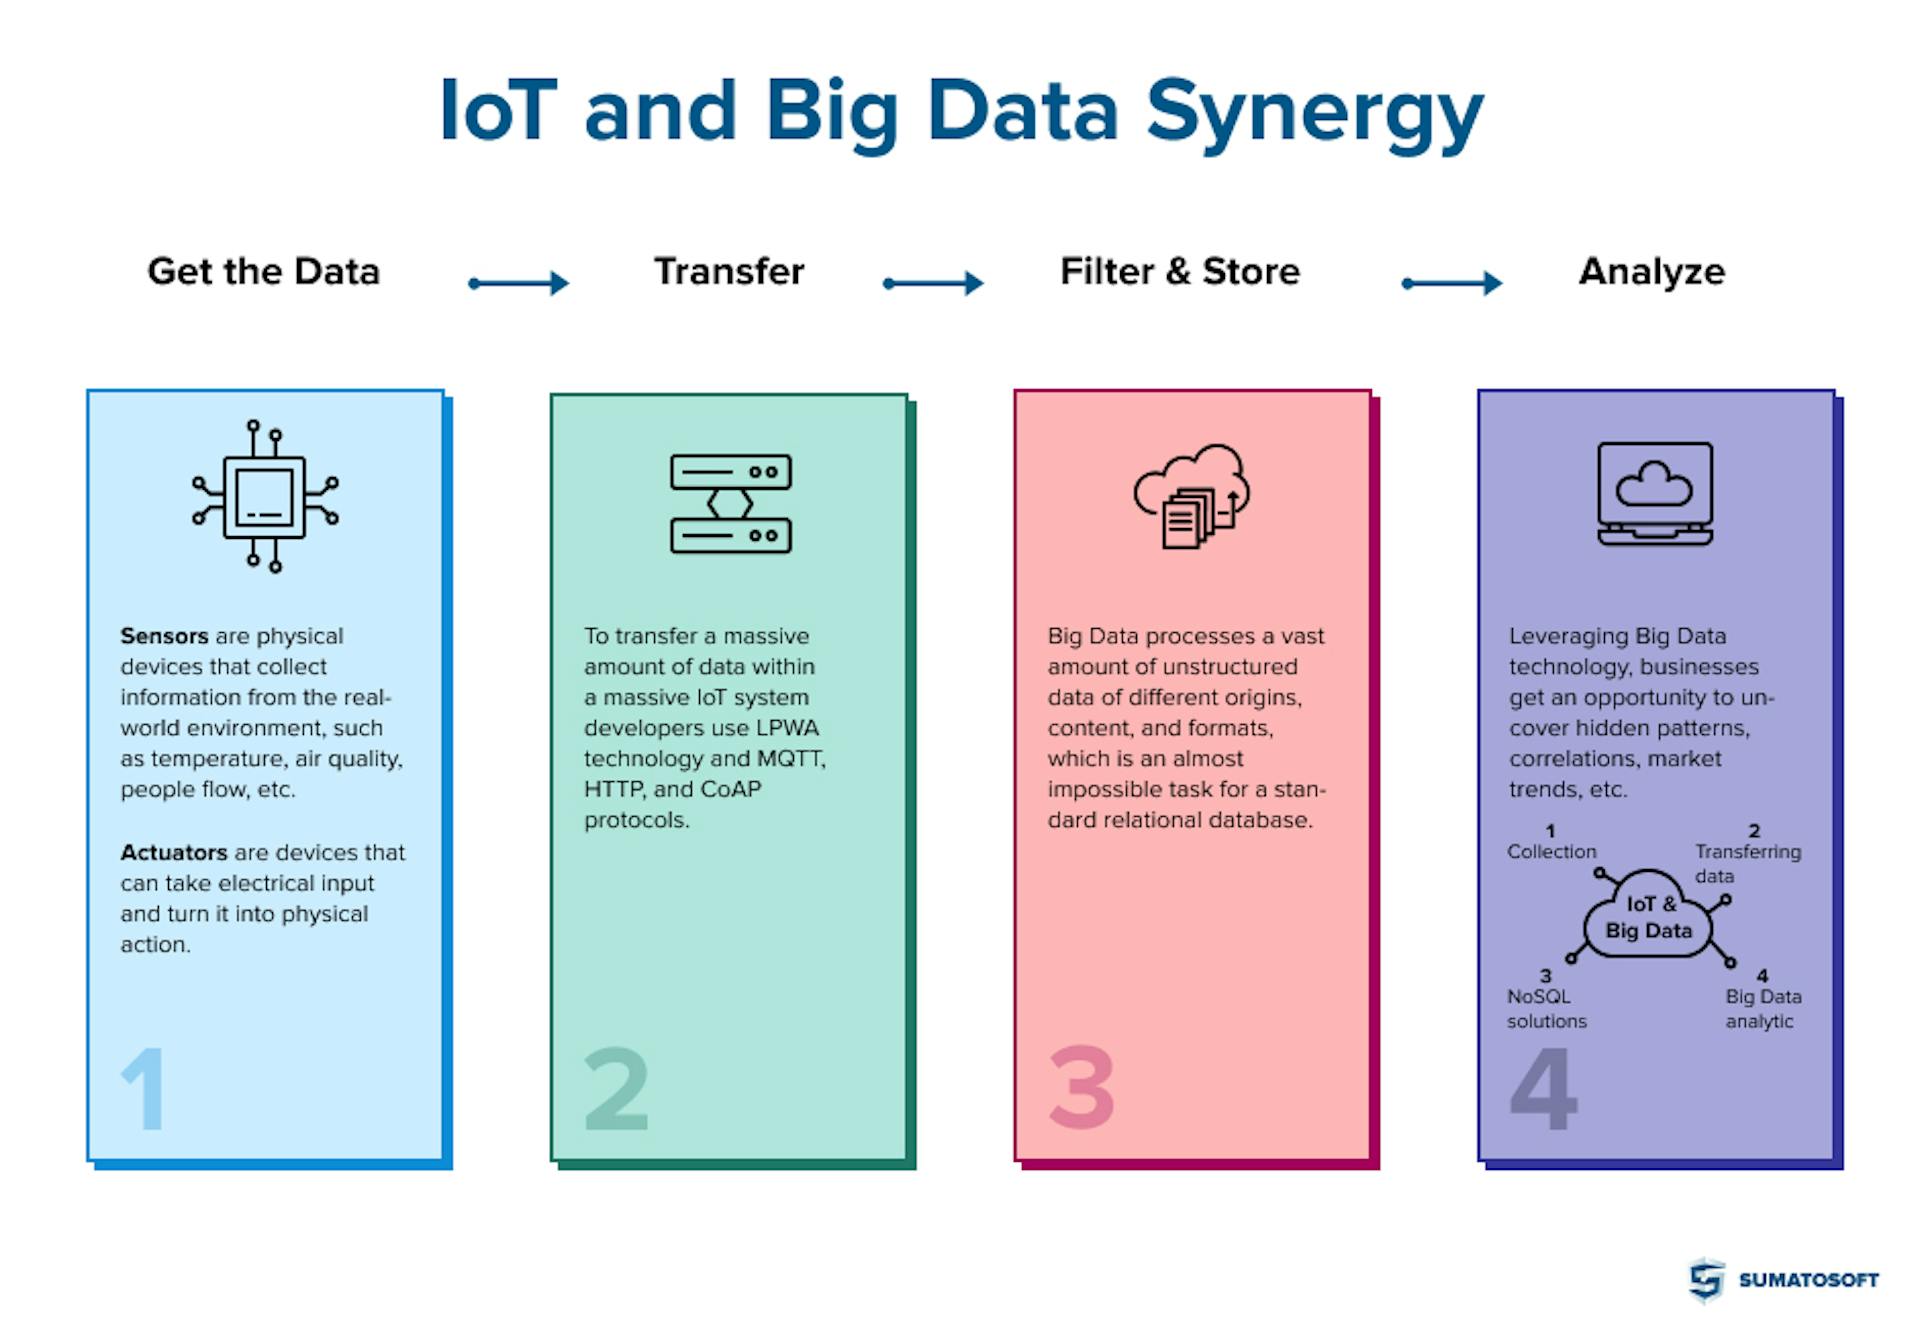 IoT and Big Data Synergy